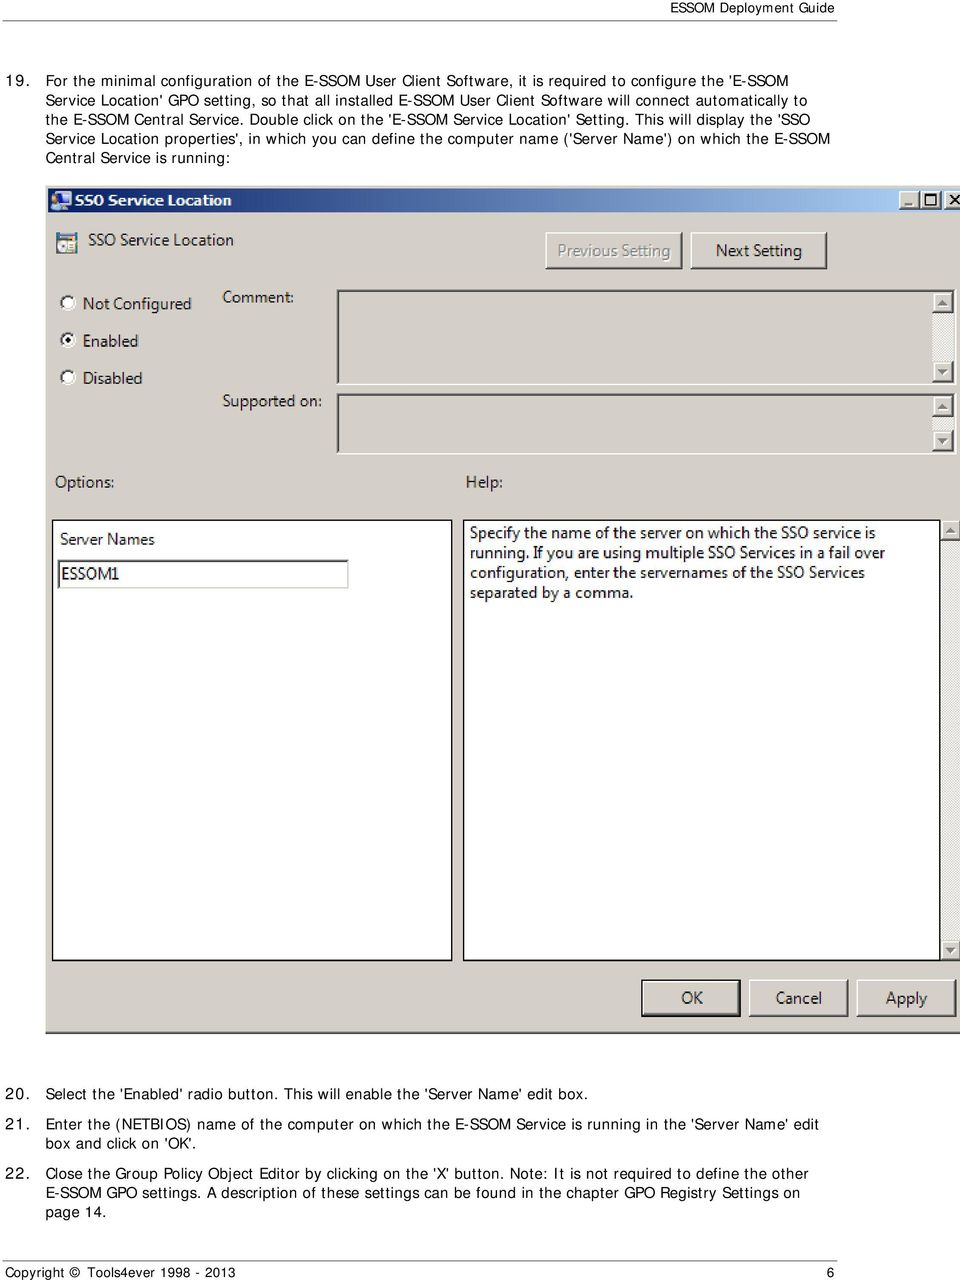 This will display the 'SSO Service Location properties', in which you can define the computer name ('Server Name') on which the E-SSOM Central Service is running: 20.